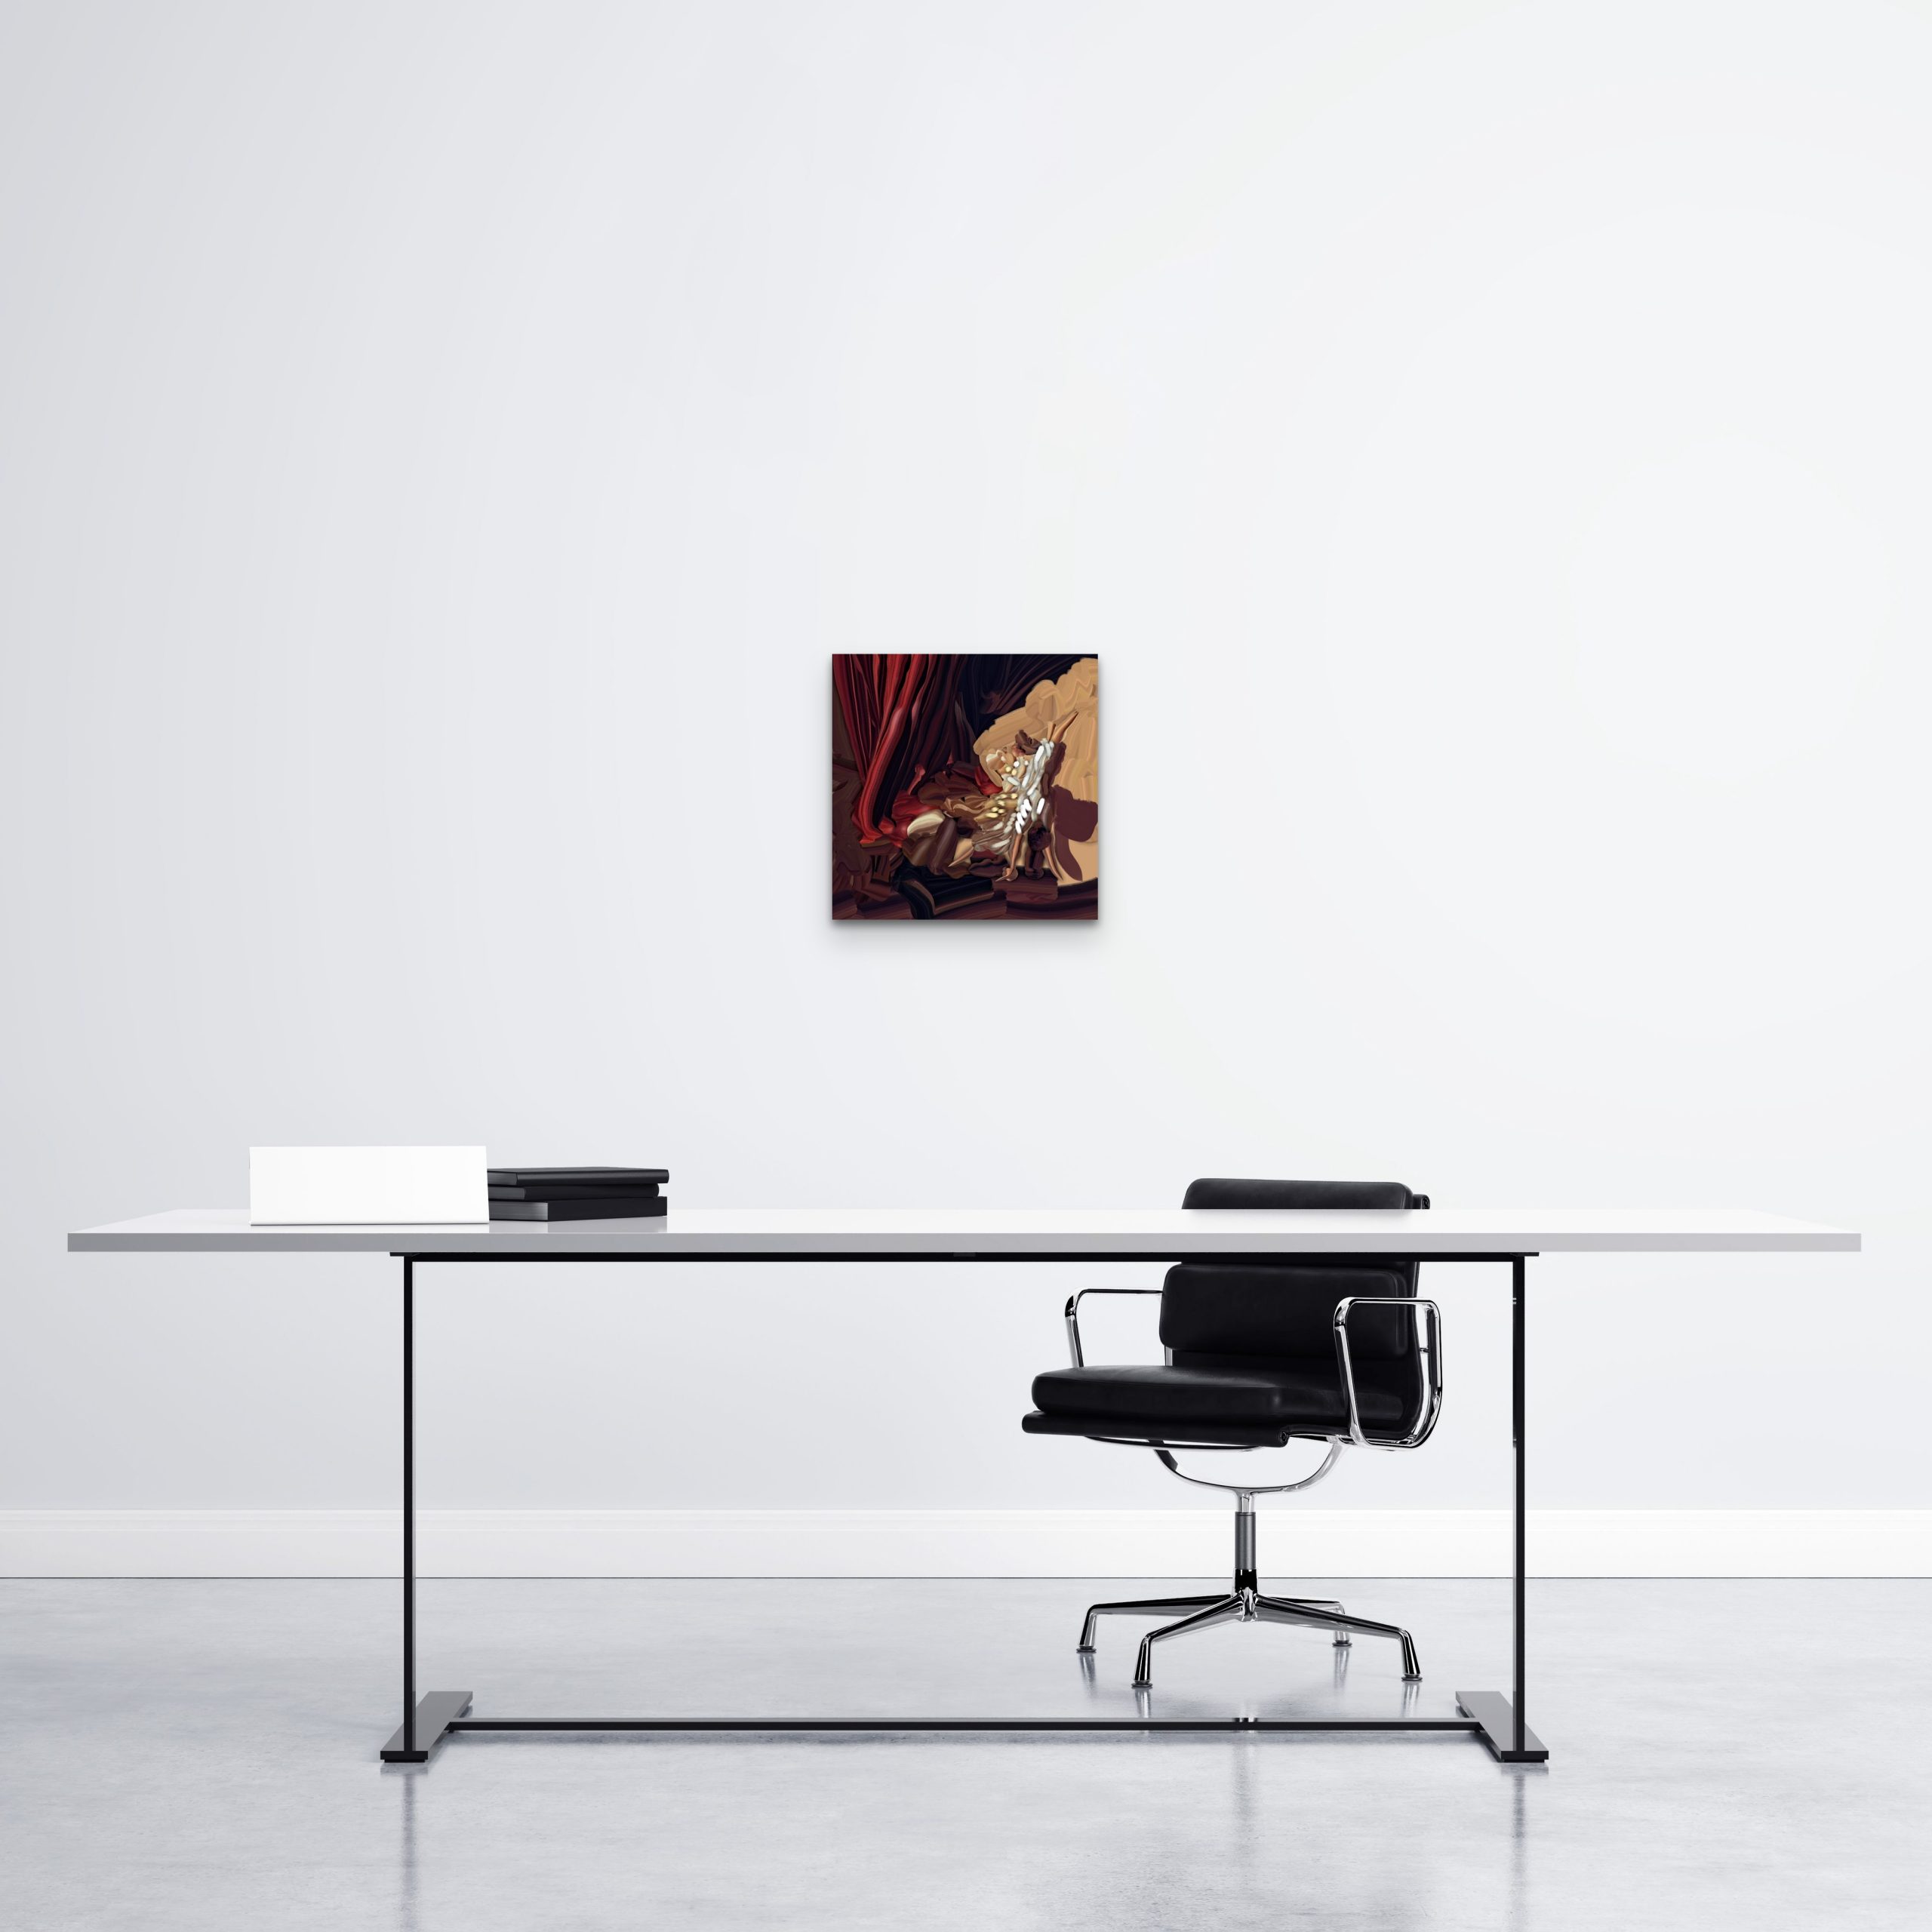 An artwork measuring 12 x 1 2 inches displayed in an office setting. The colourful piece adds a touch of creativity and vibrancy to the workspace, enhancing the overall aesthetic appeal.